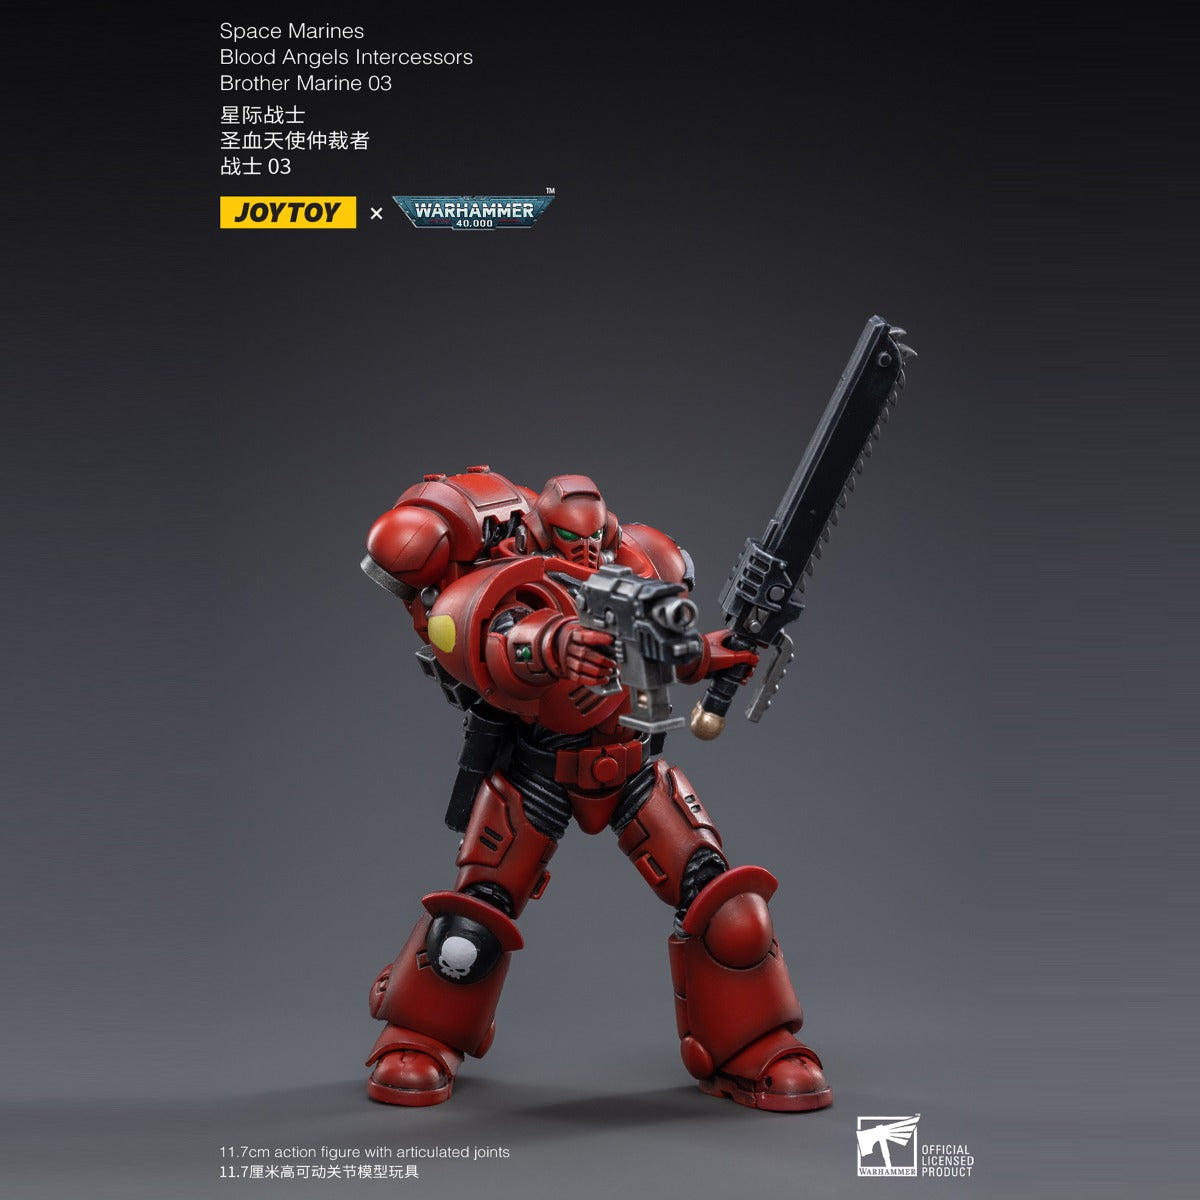 Warhammer Collectibles: 1/18 Scale Blood Angels Intercessors Brother Marine 03